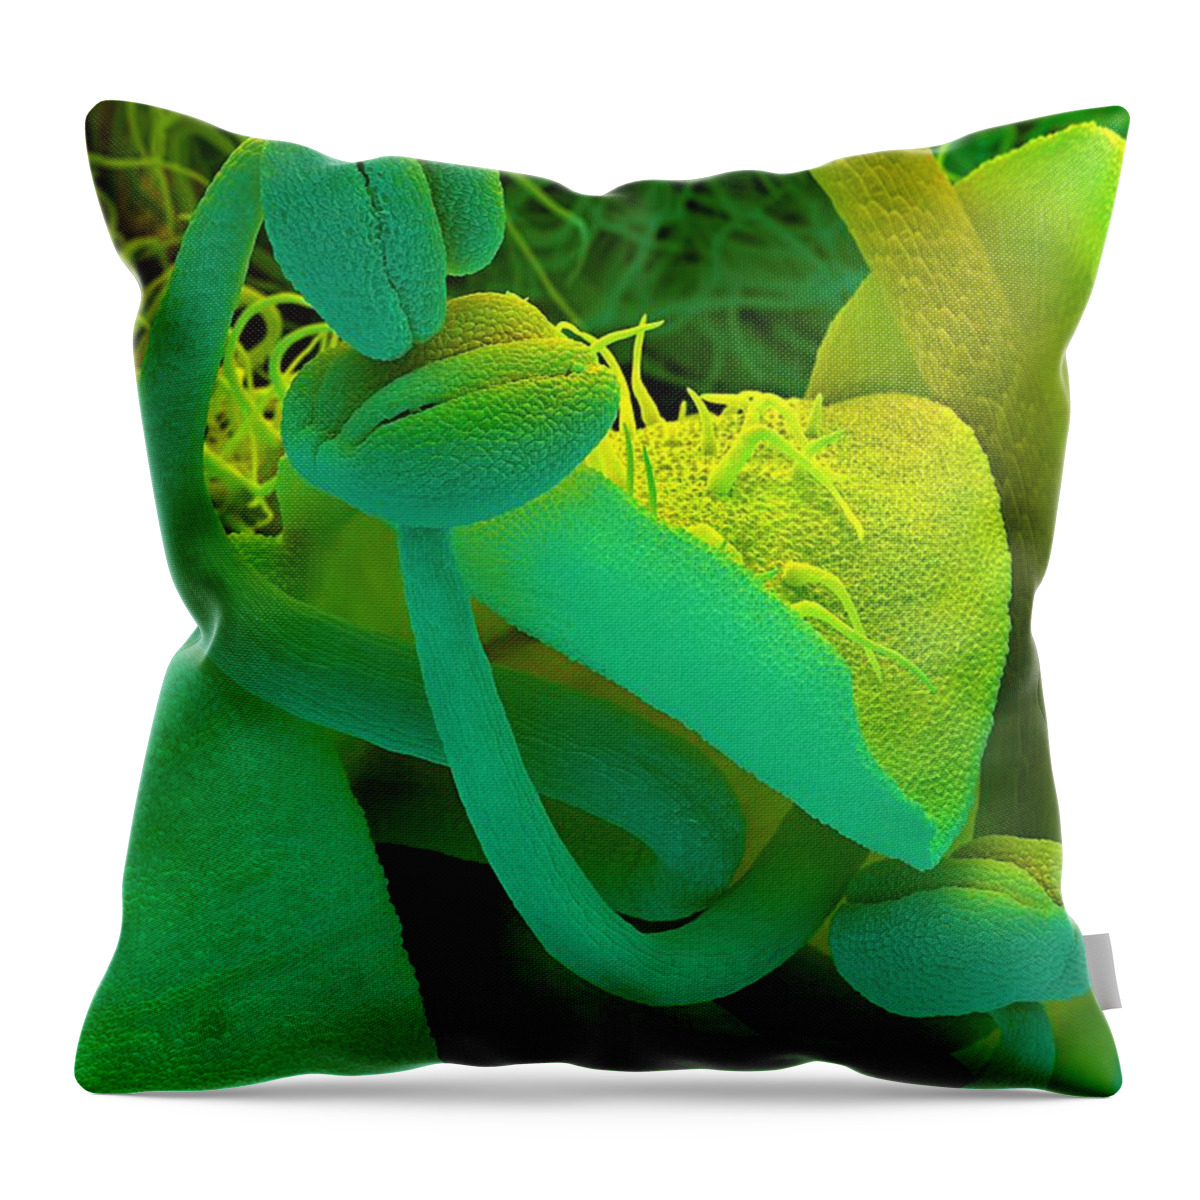 Rosemary Throw Pillow featuring the photograph Rosemary SEM by Spl